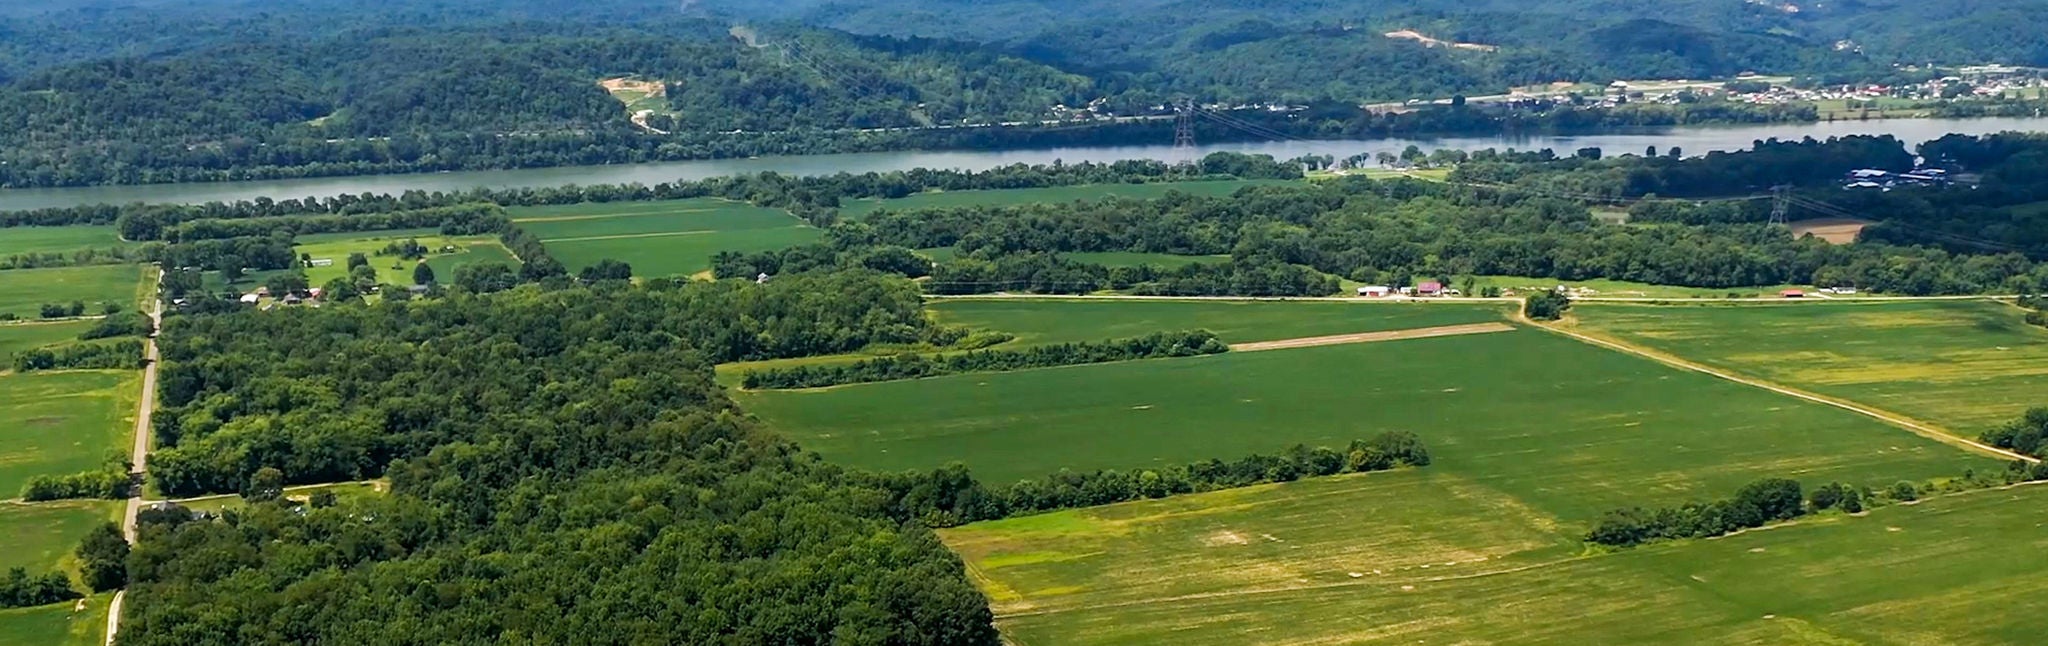 Aerial photo of a rural railway that is part of the Norfolk Southern railroad network.